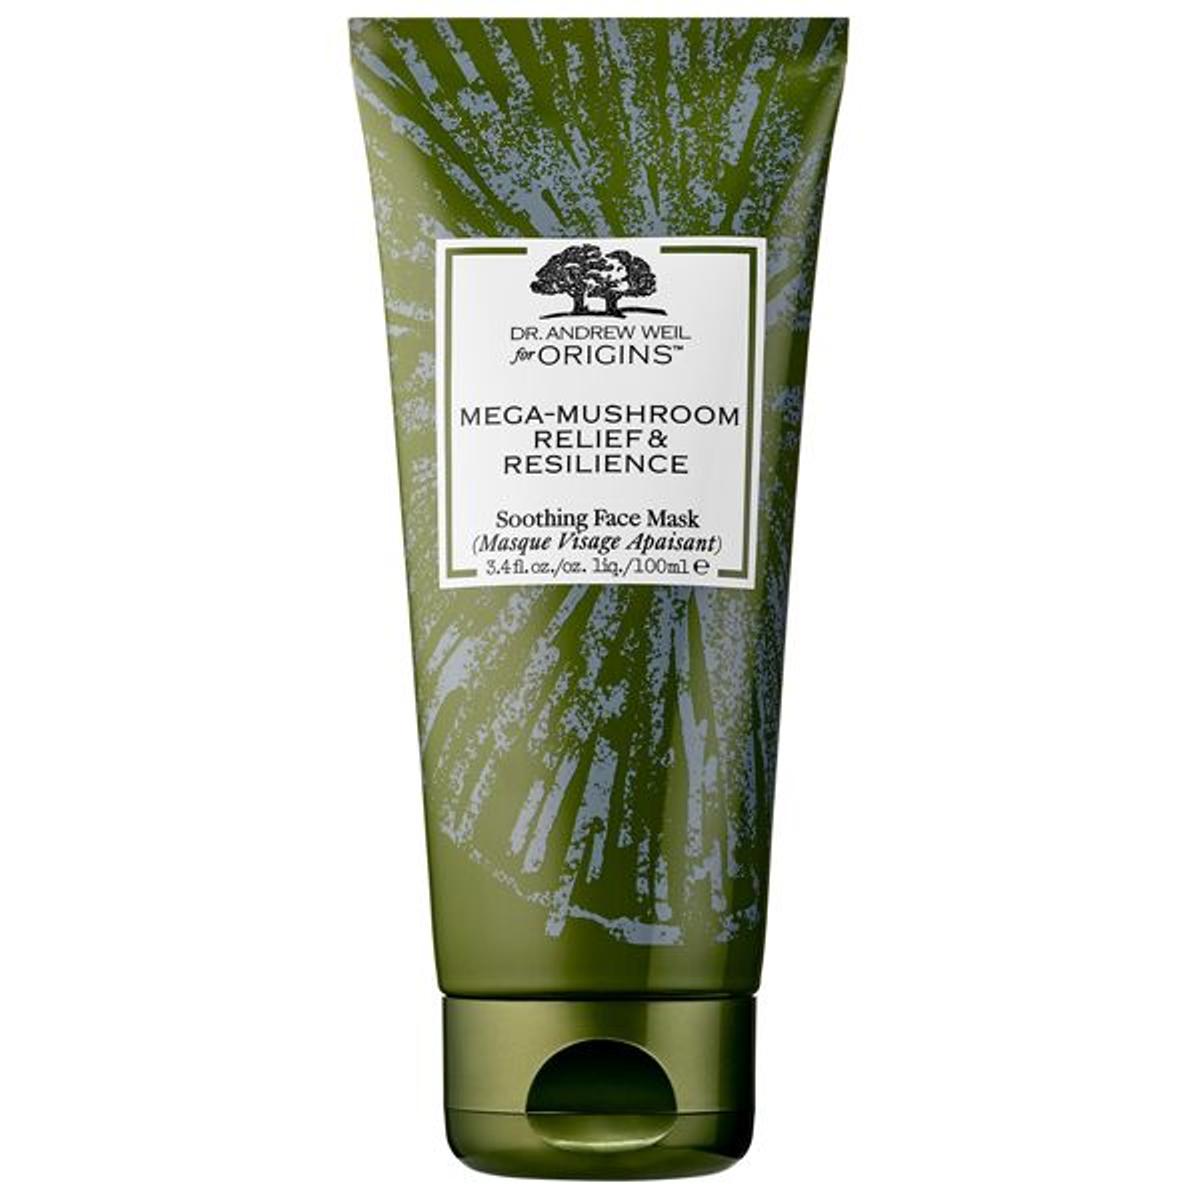 Skin relief &amp; resilience face mask, Origins